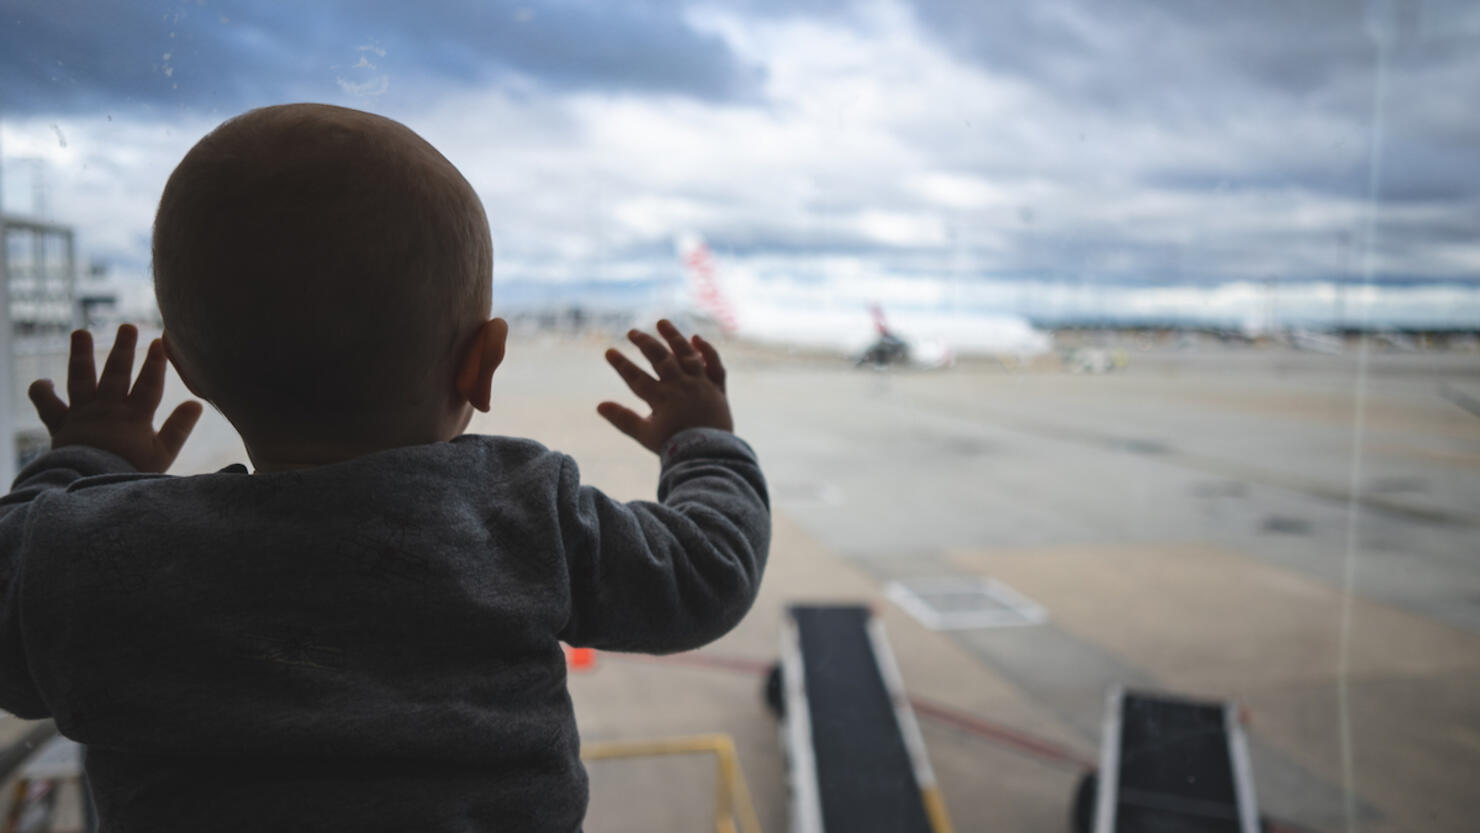 One year old baby looking through an airport window